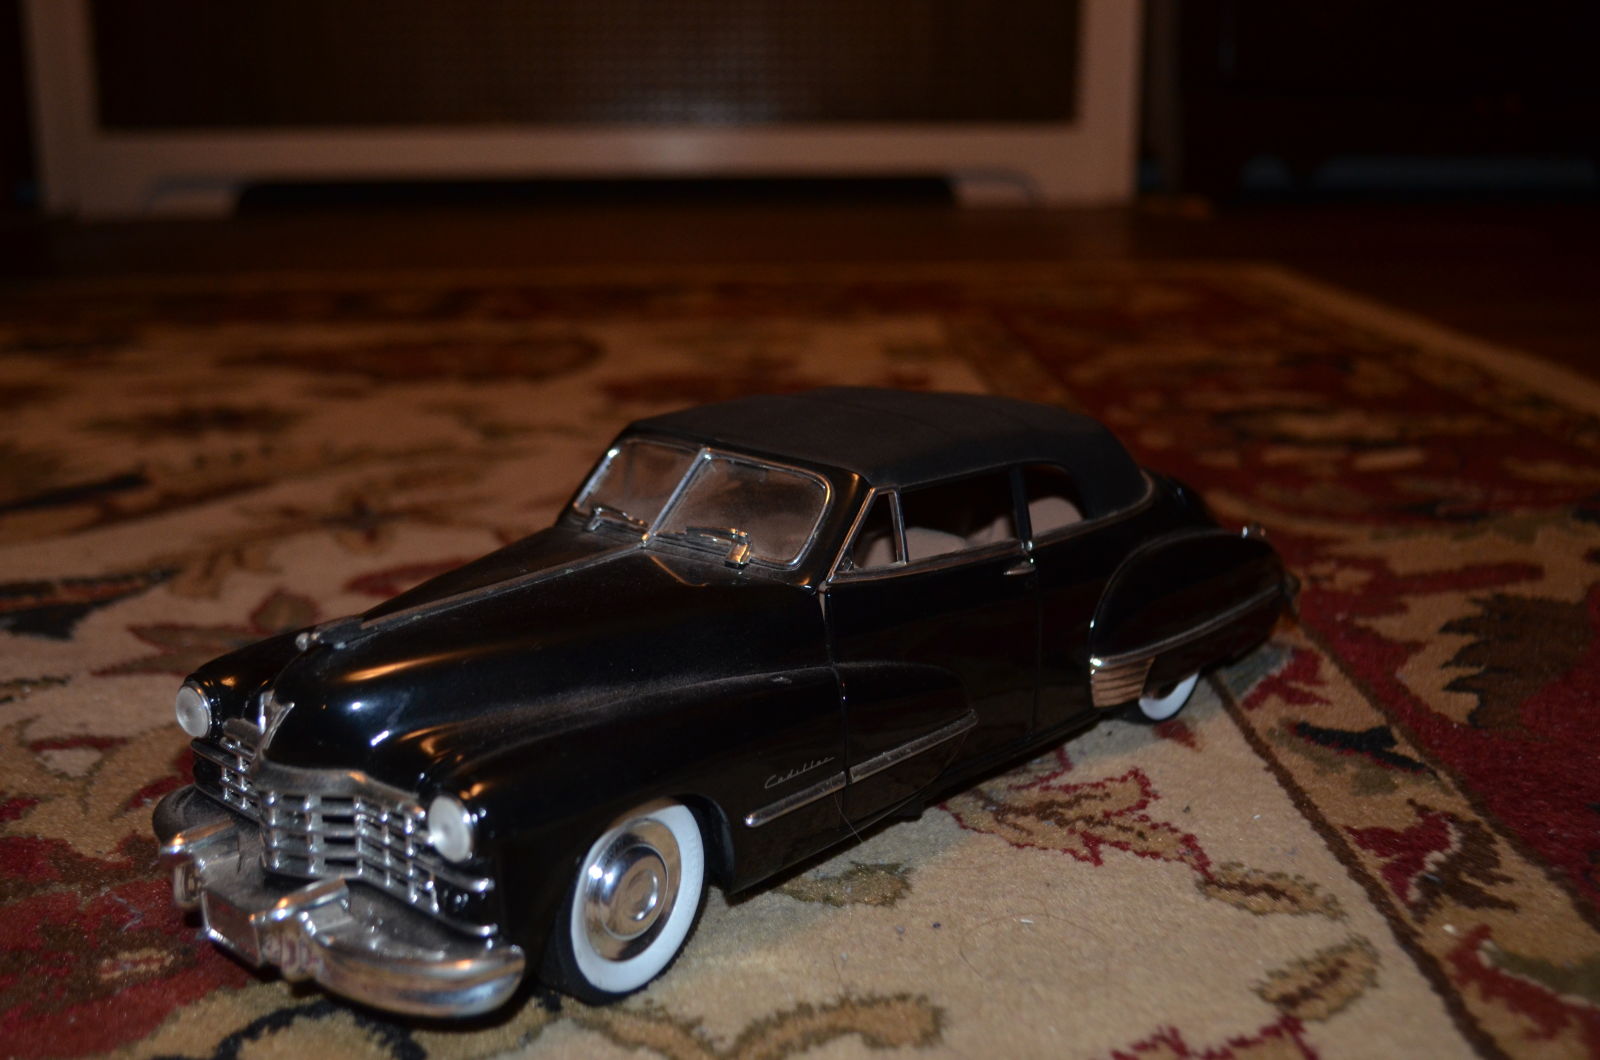  1/18 1946 Cadillac Convertible. Rear bumper cracked in half, antenna missing.  